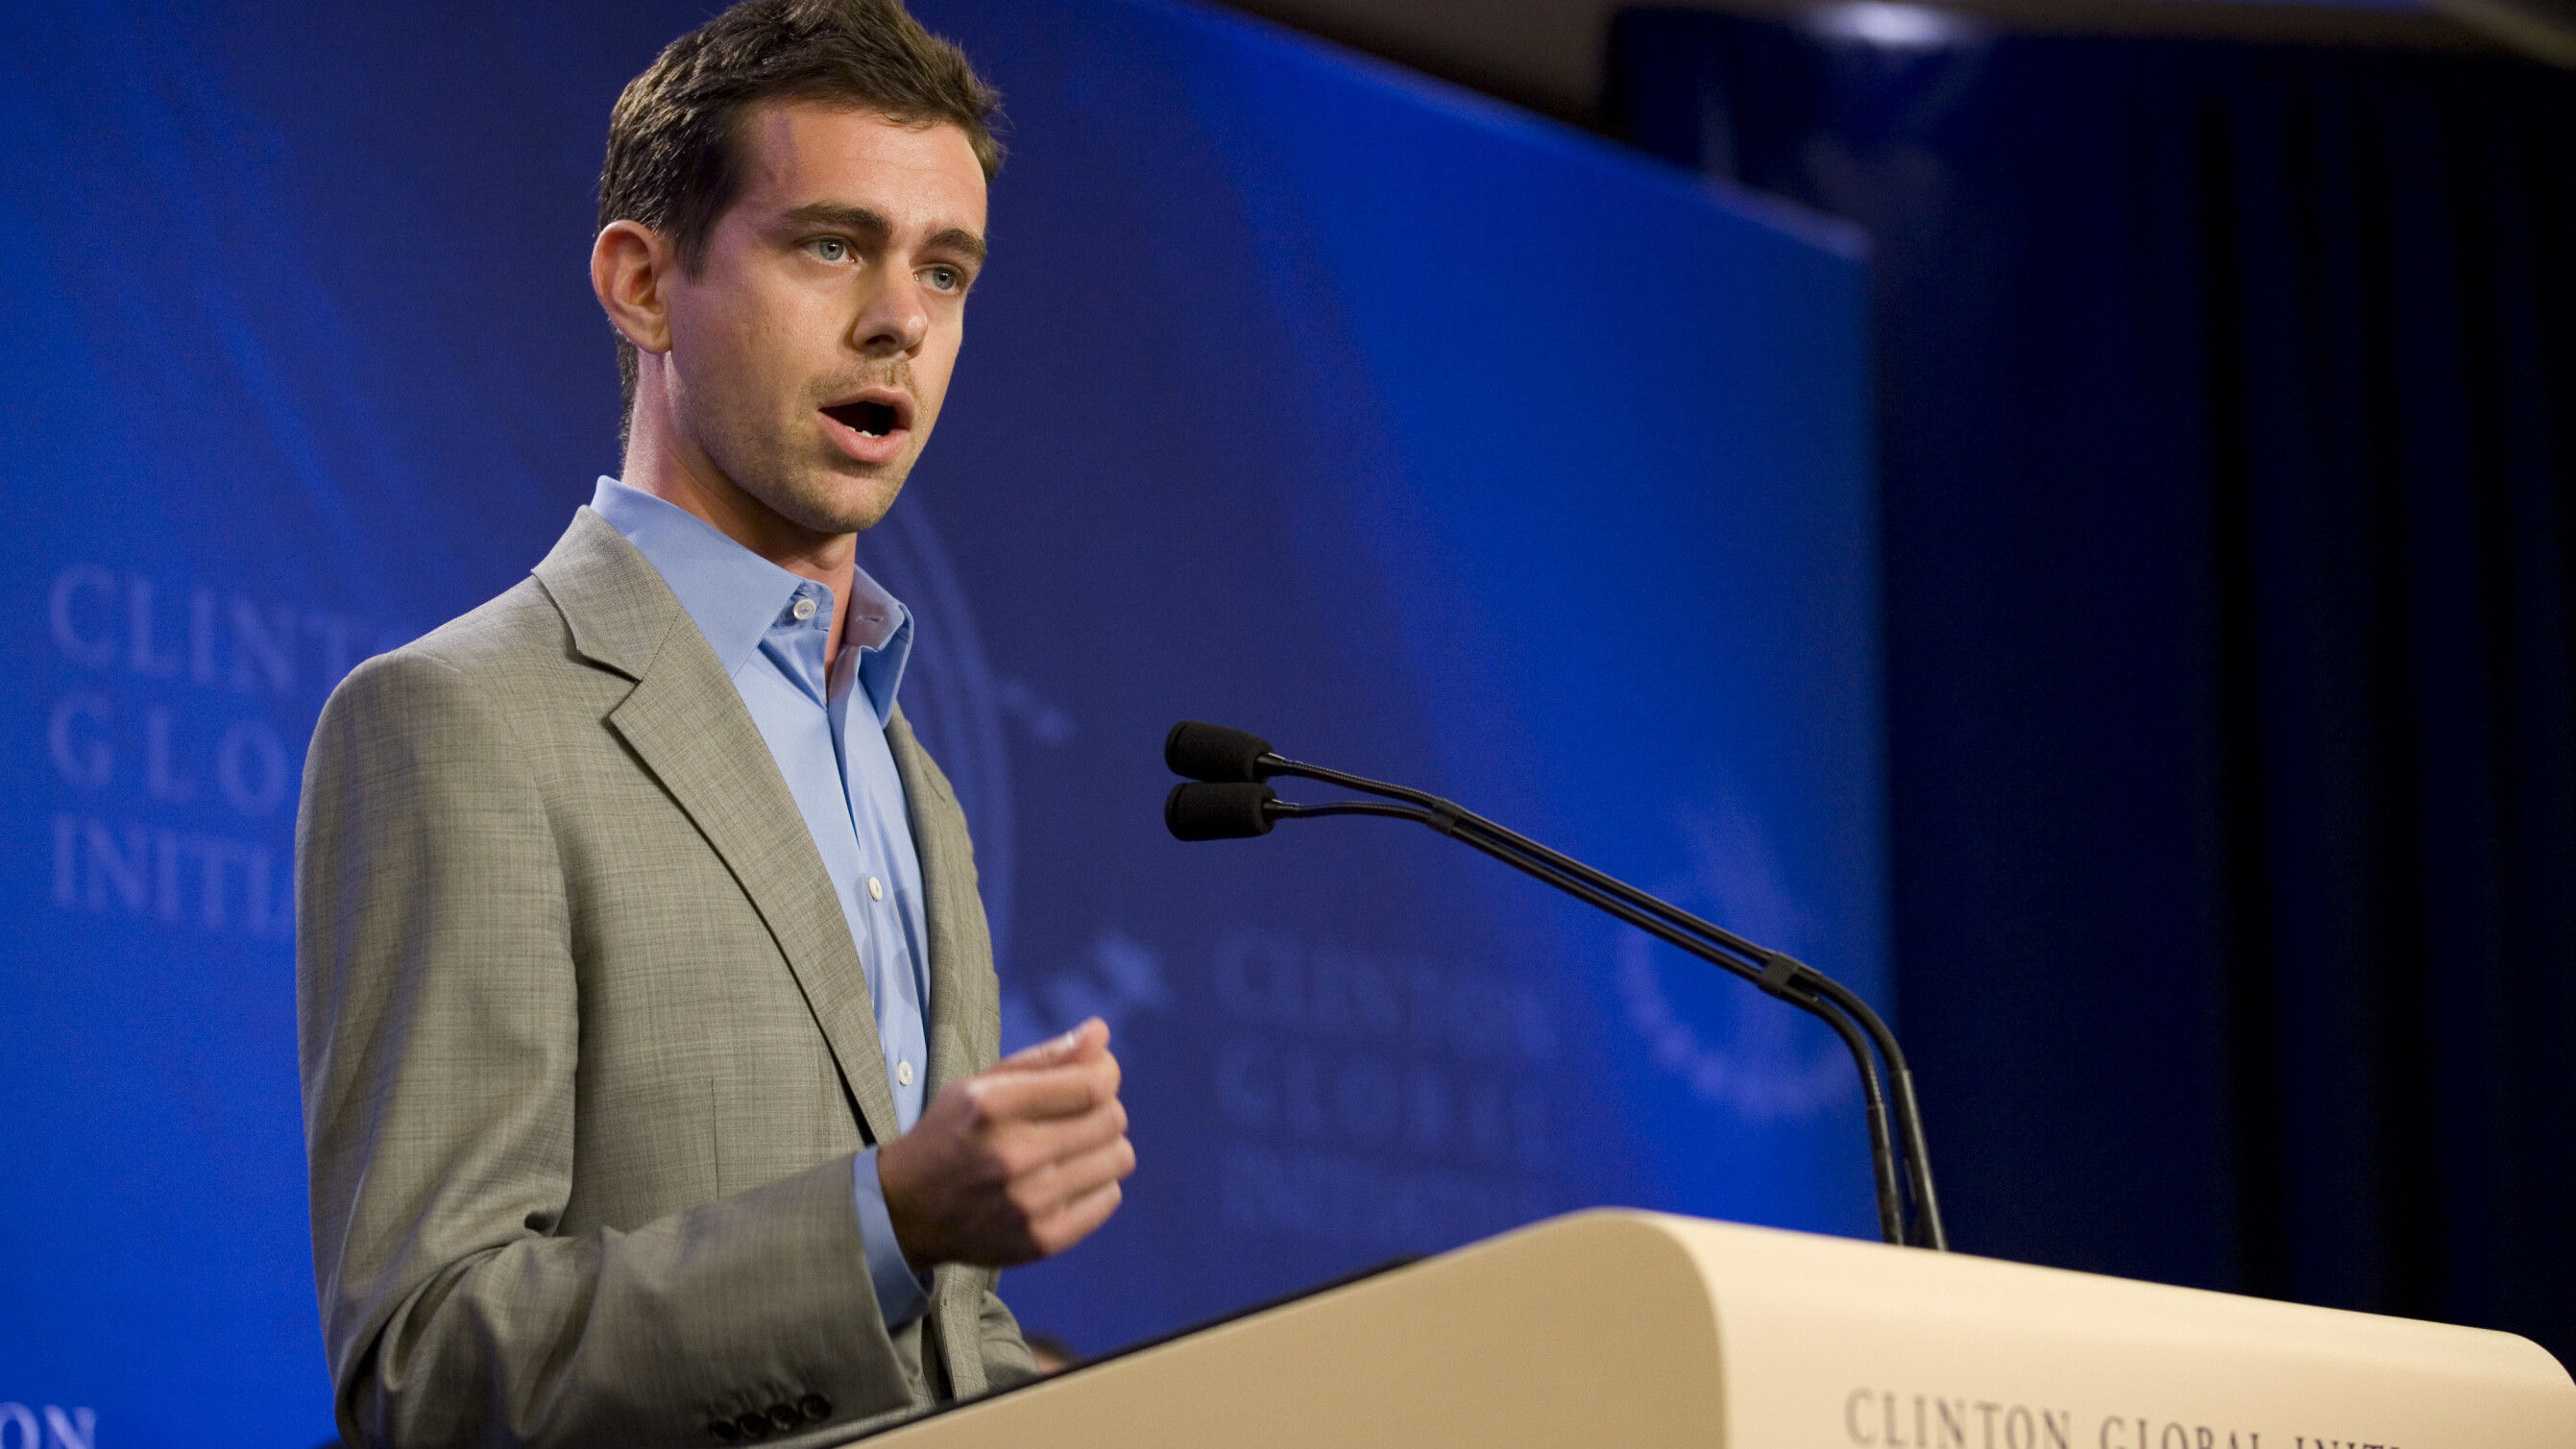 Jack Dorsey just took shots at Dick Costolo’s tenure as Twitter CEO